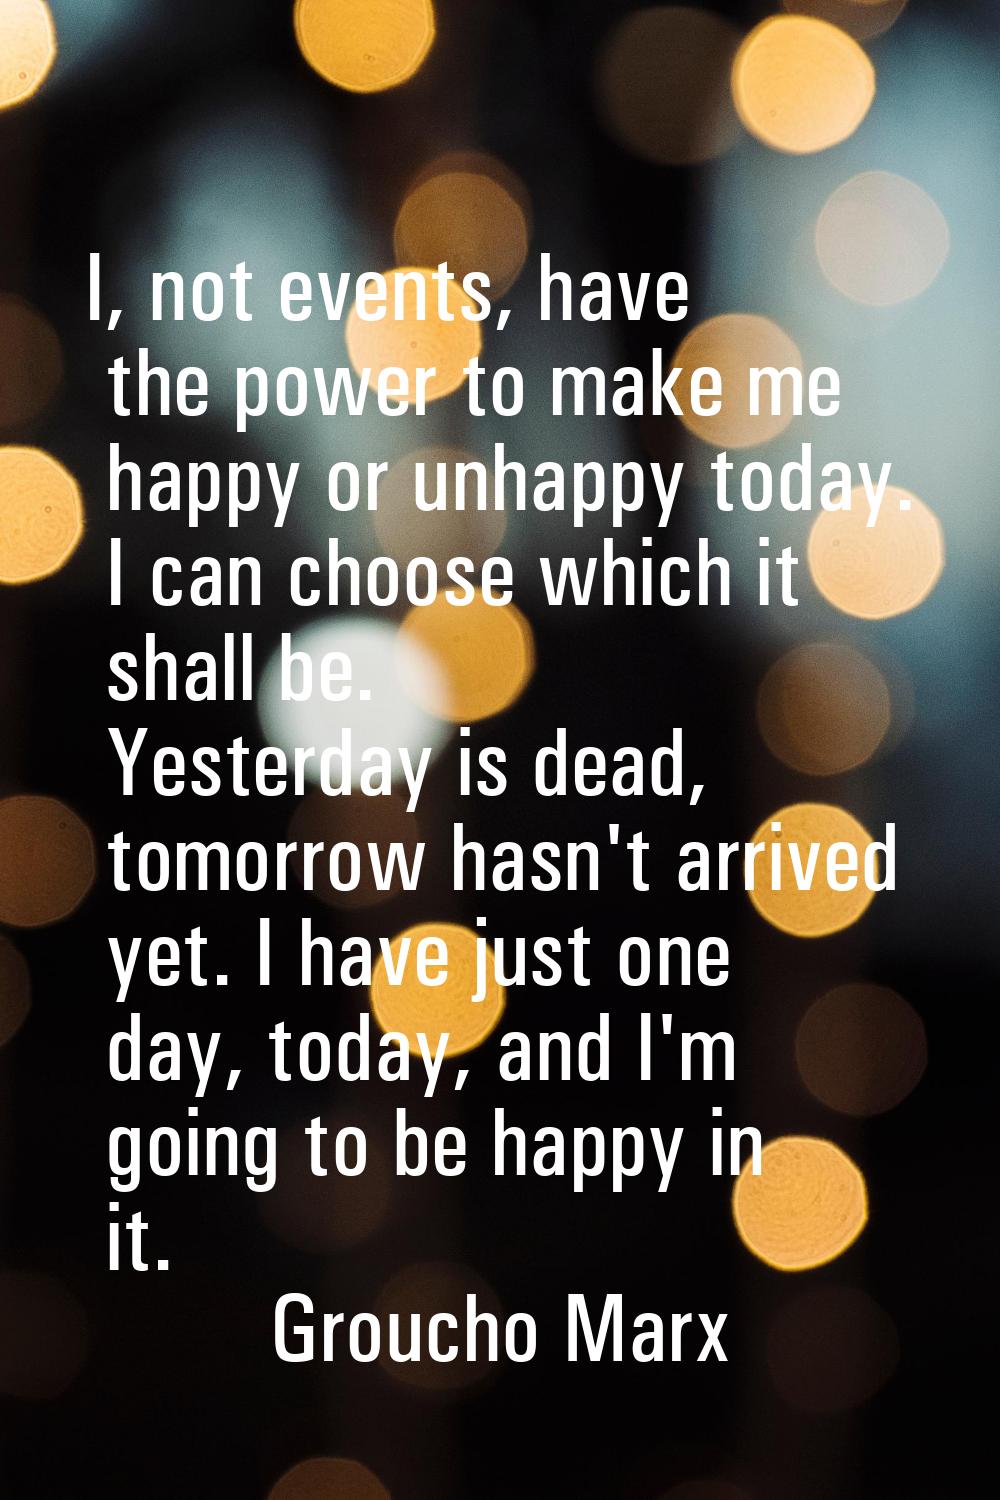 I, not events, have the power to make me happy or unhappy today. I can choose which it shall be. Ye